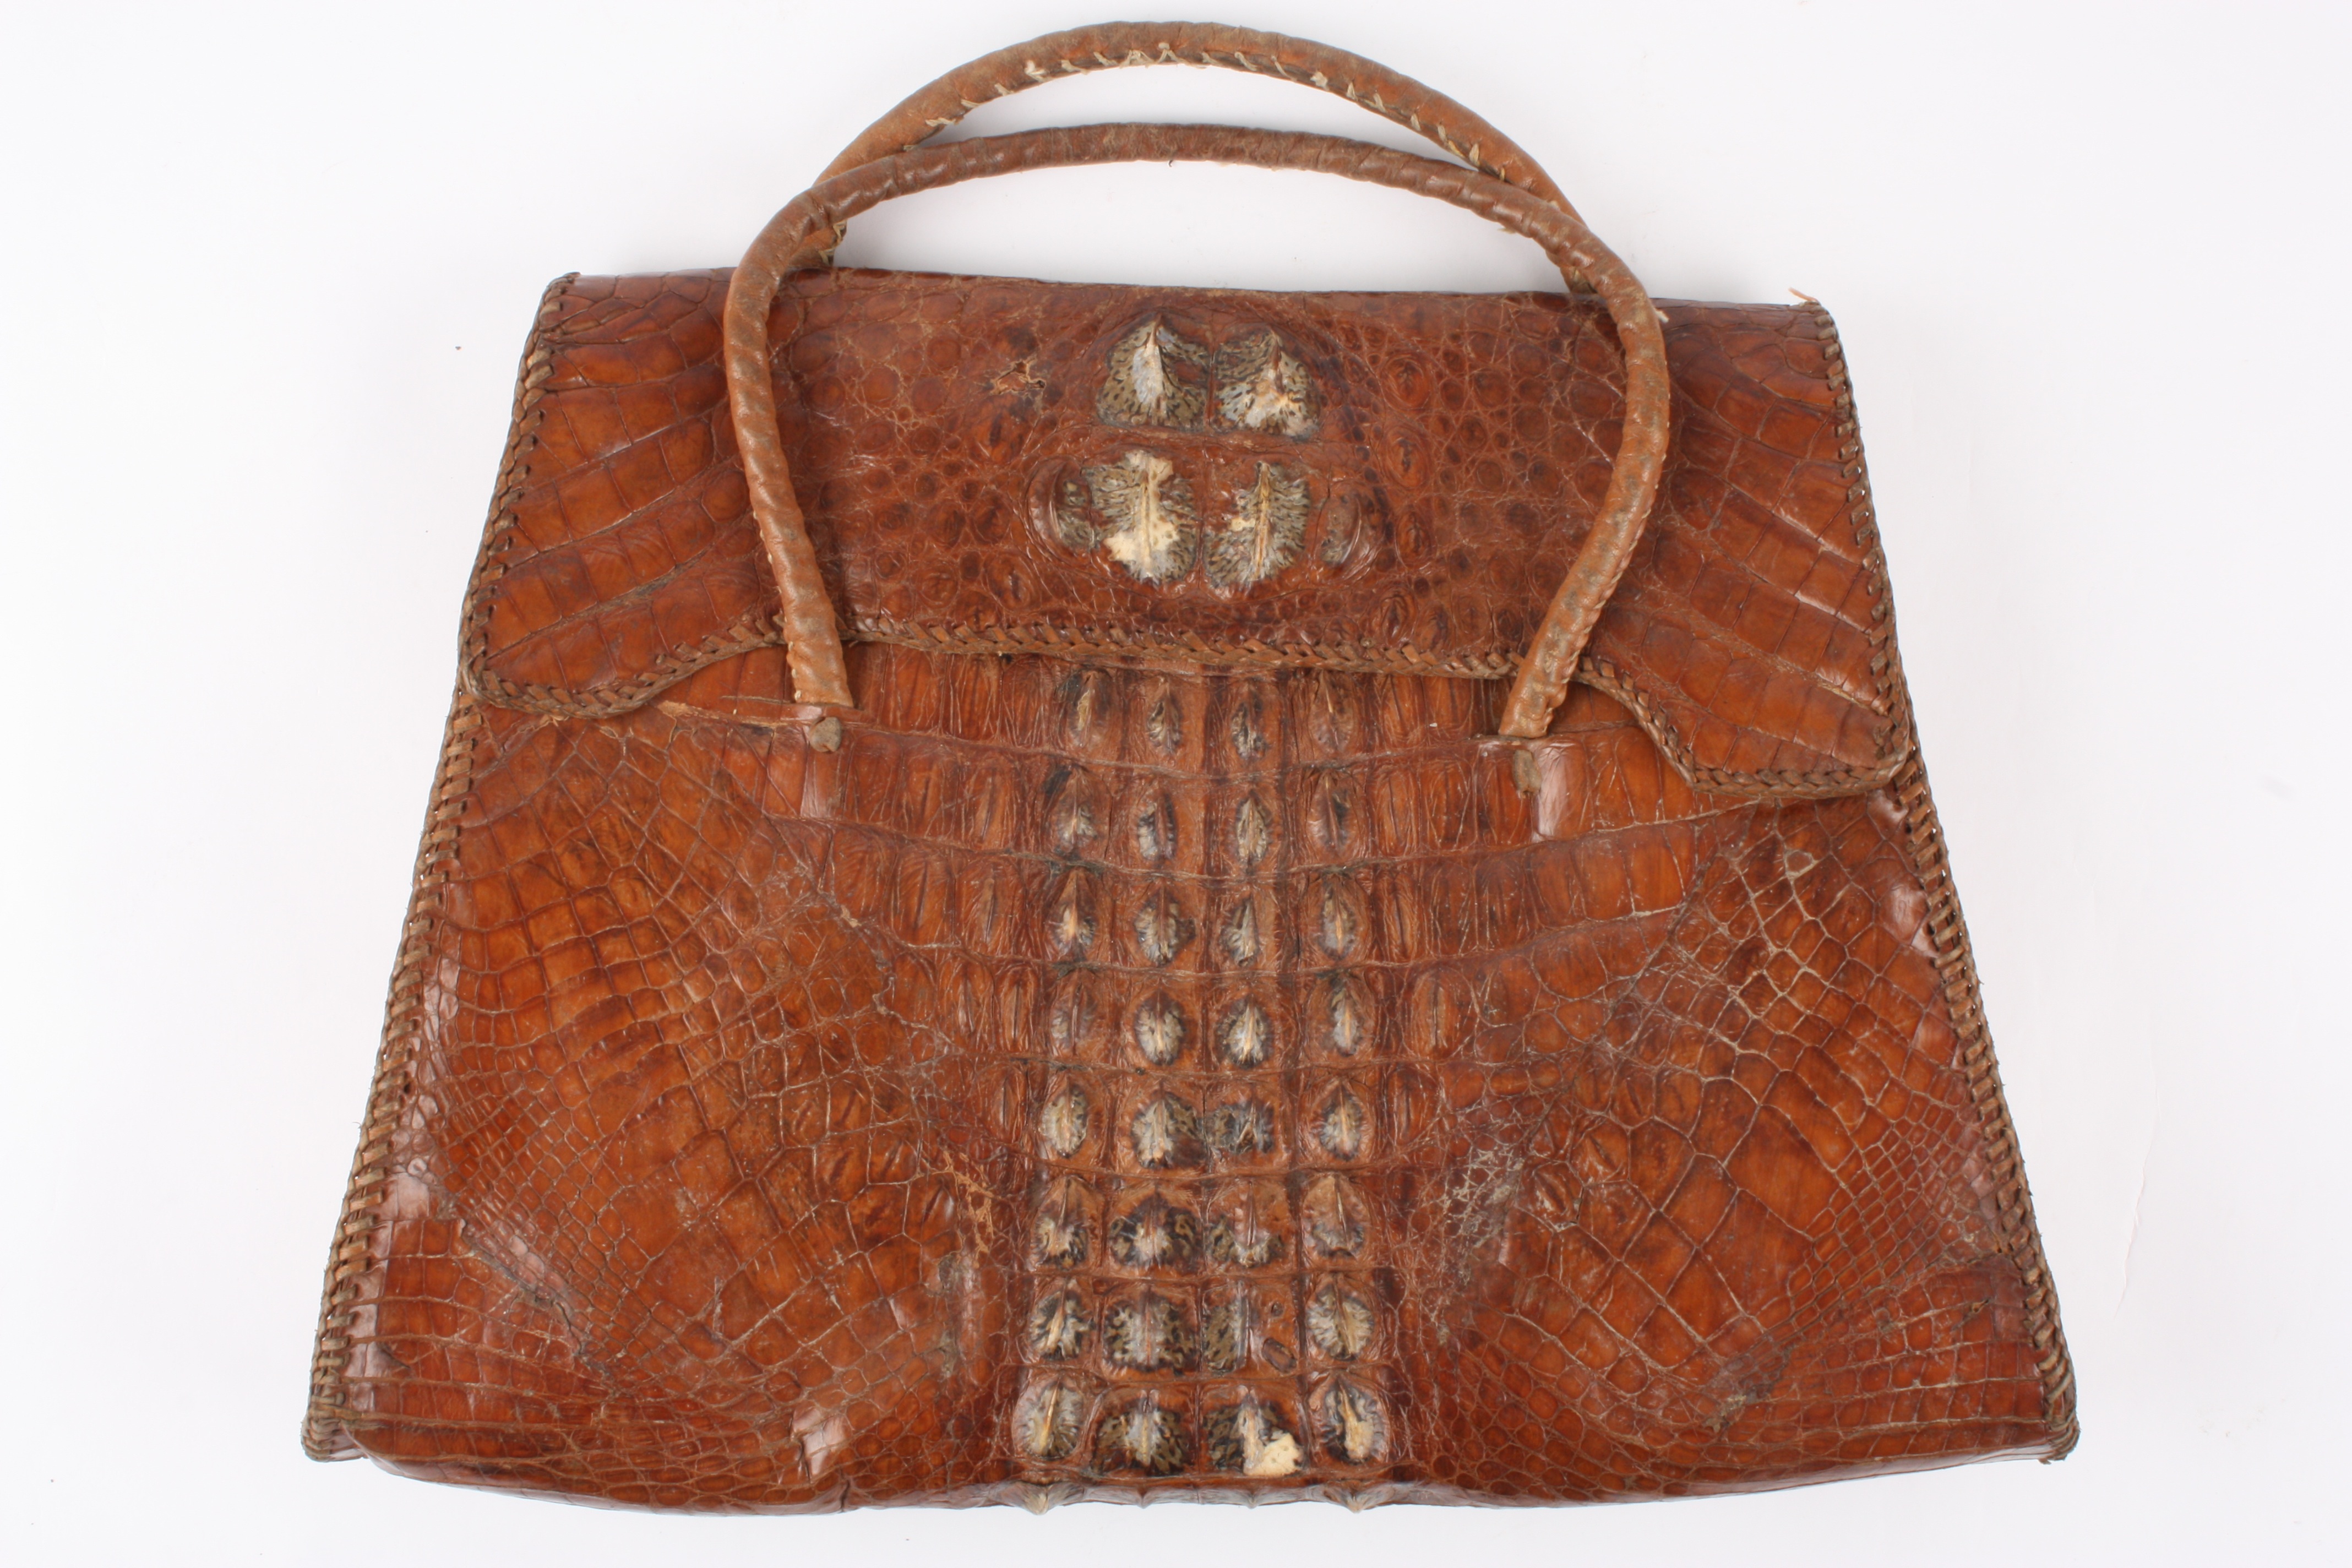 Brown alligator/crocodile skin bag.
With two sections inside.Dimensions: Condition reportFair